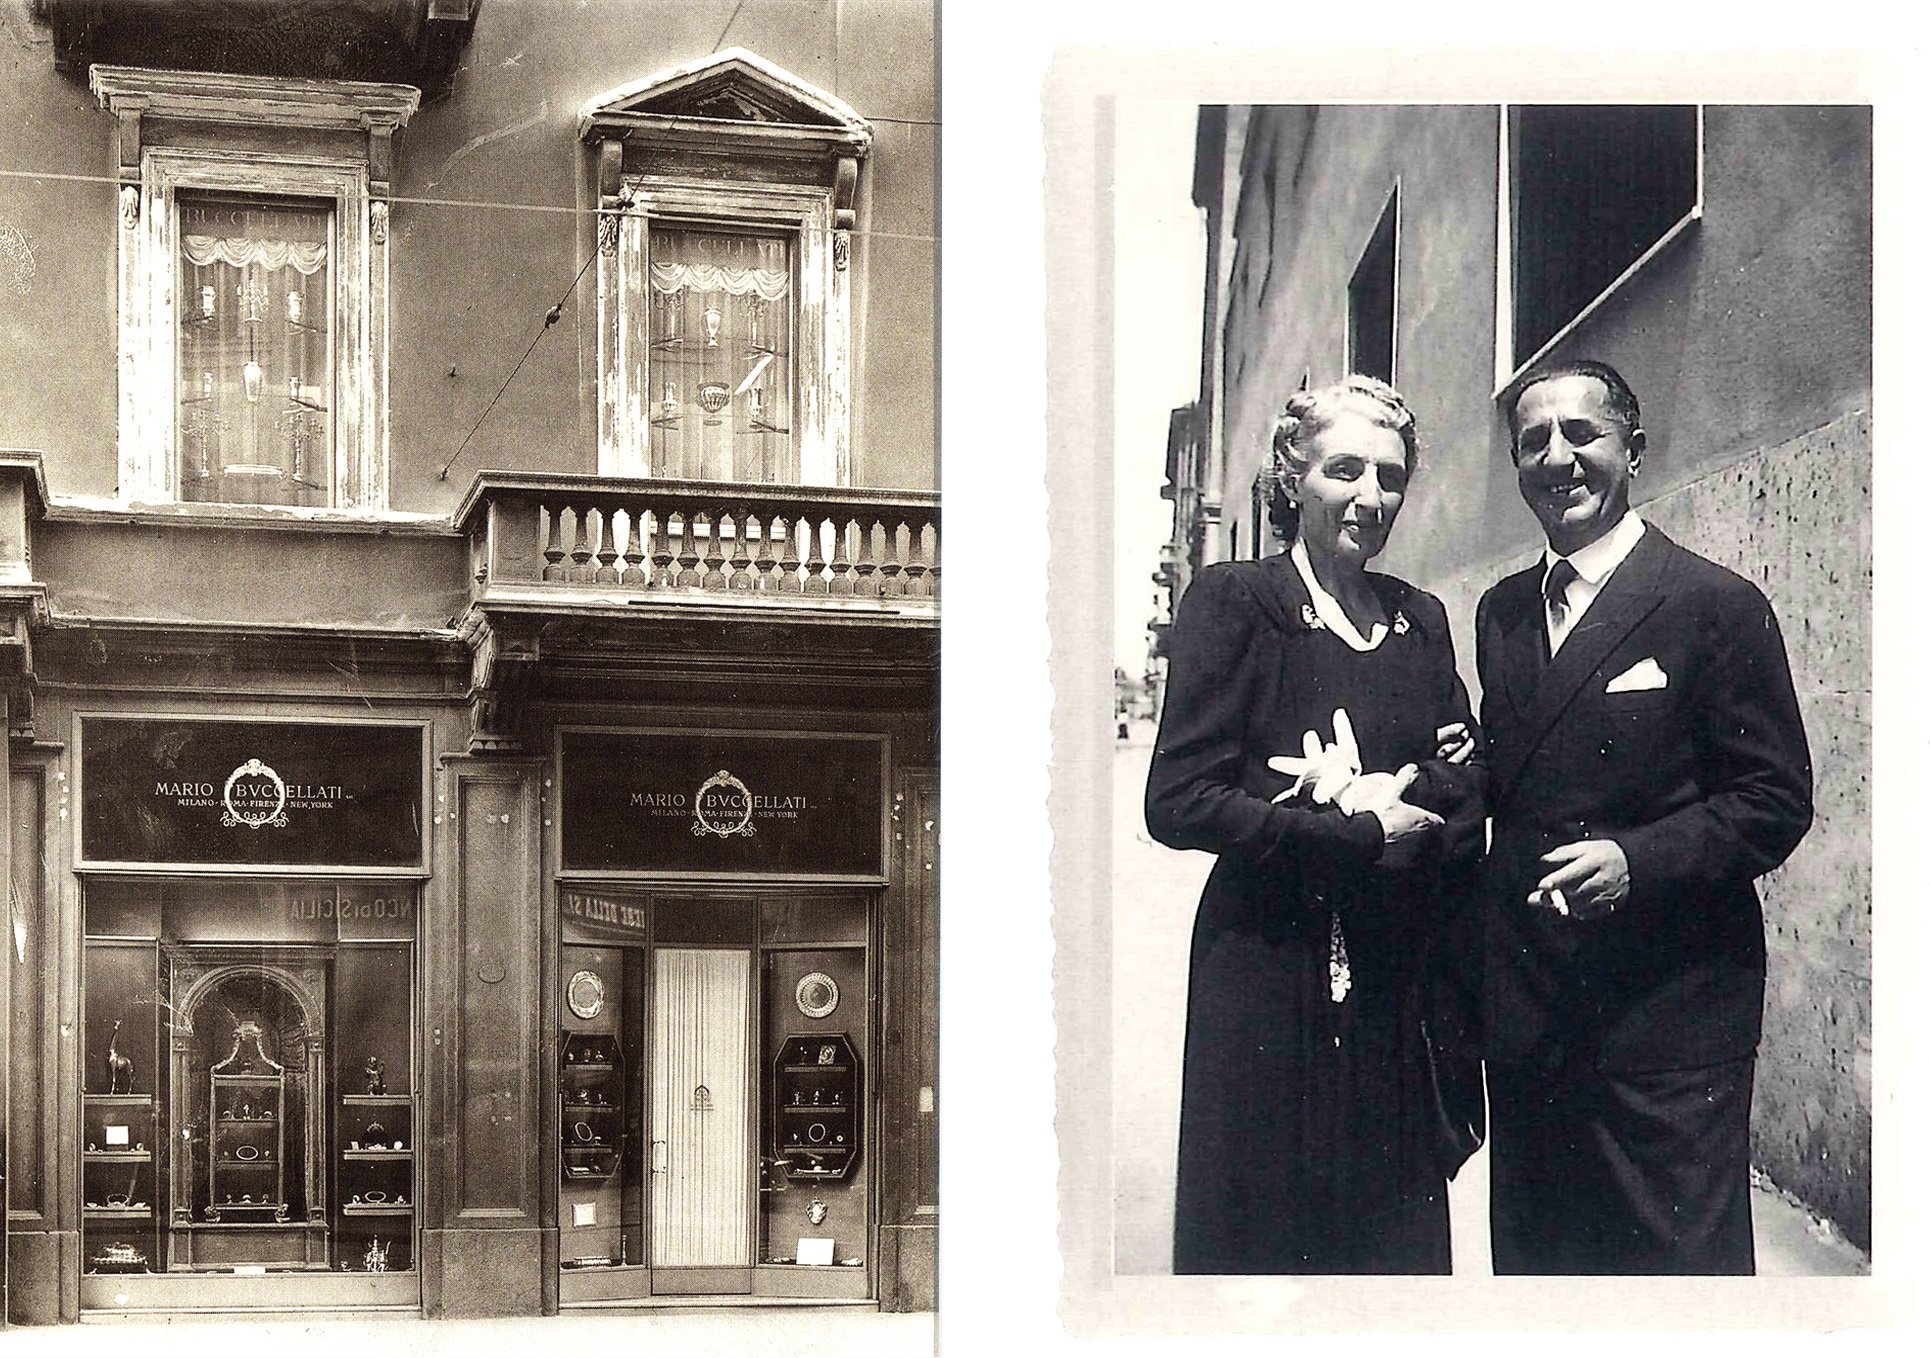 The first Buccellati boutique in Milan in the early 20th century. Mario Buccellati, the founder of the Italian jewelry company Buccellati, with his wife, Maria.